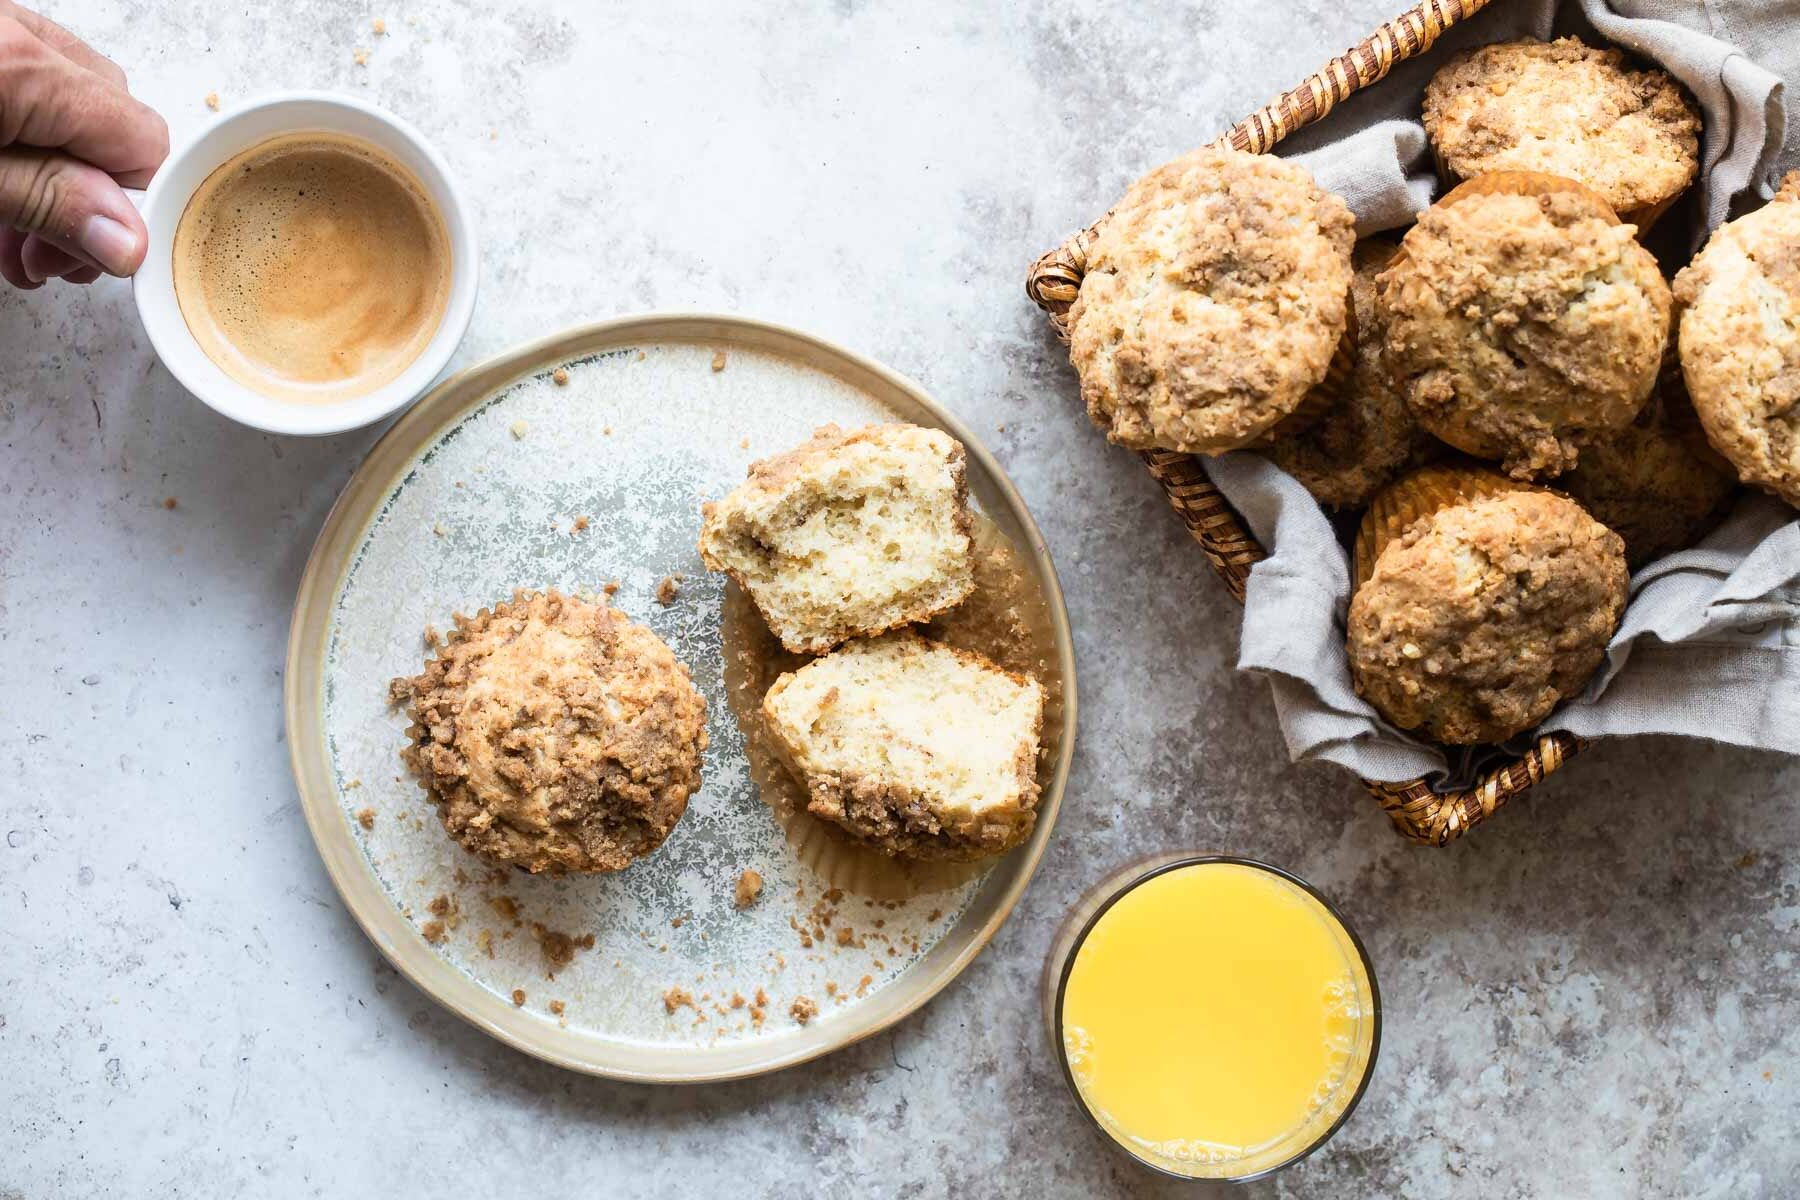 Two coffee cake muffins on a plate next to a cup of coffee and a cup of orange juice.